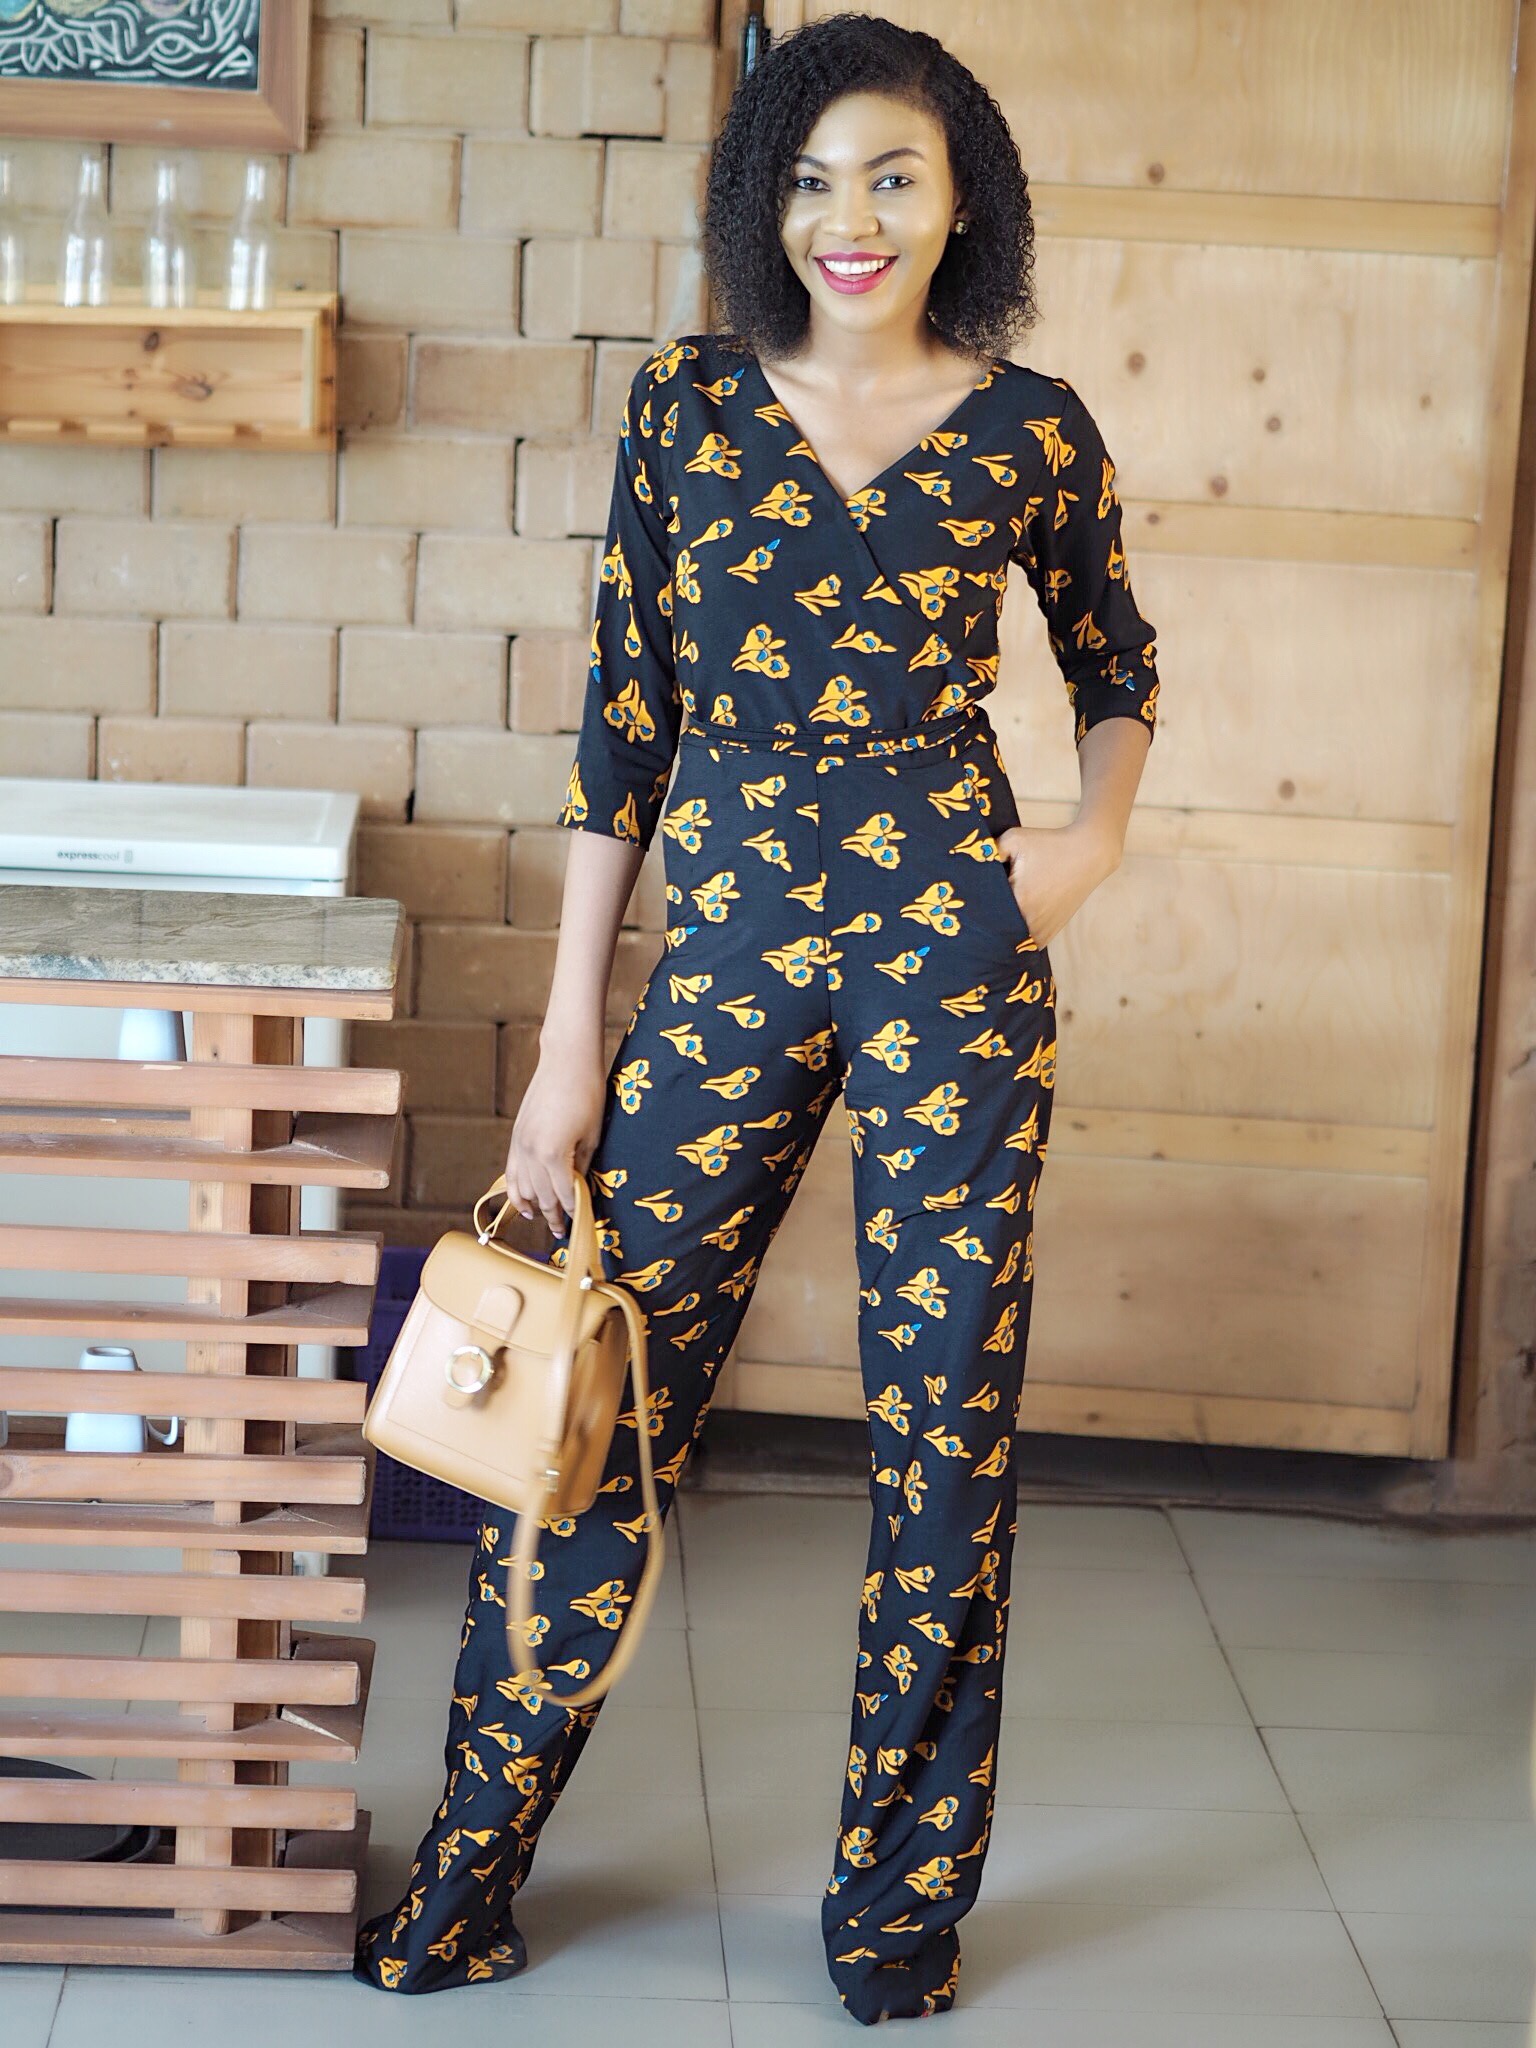 Work style jumpsuit outfit